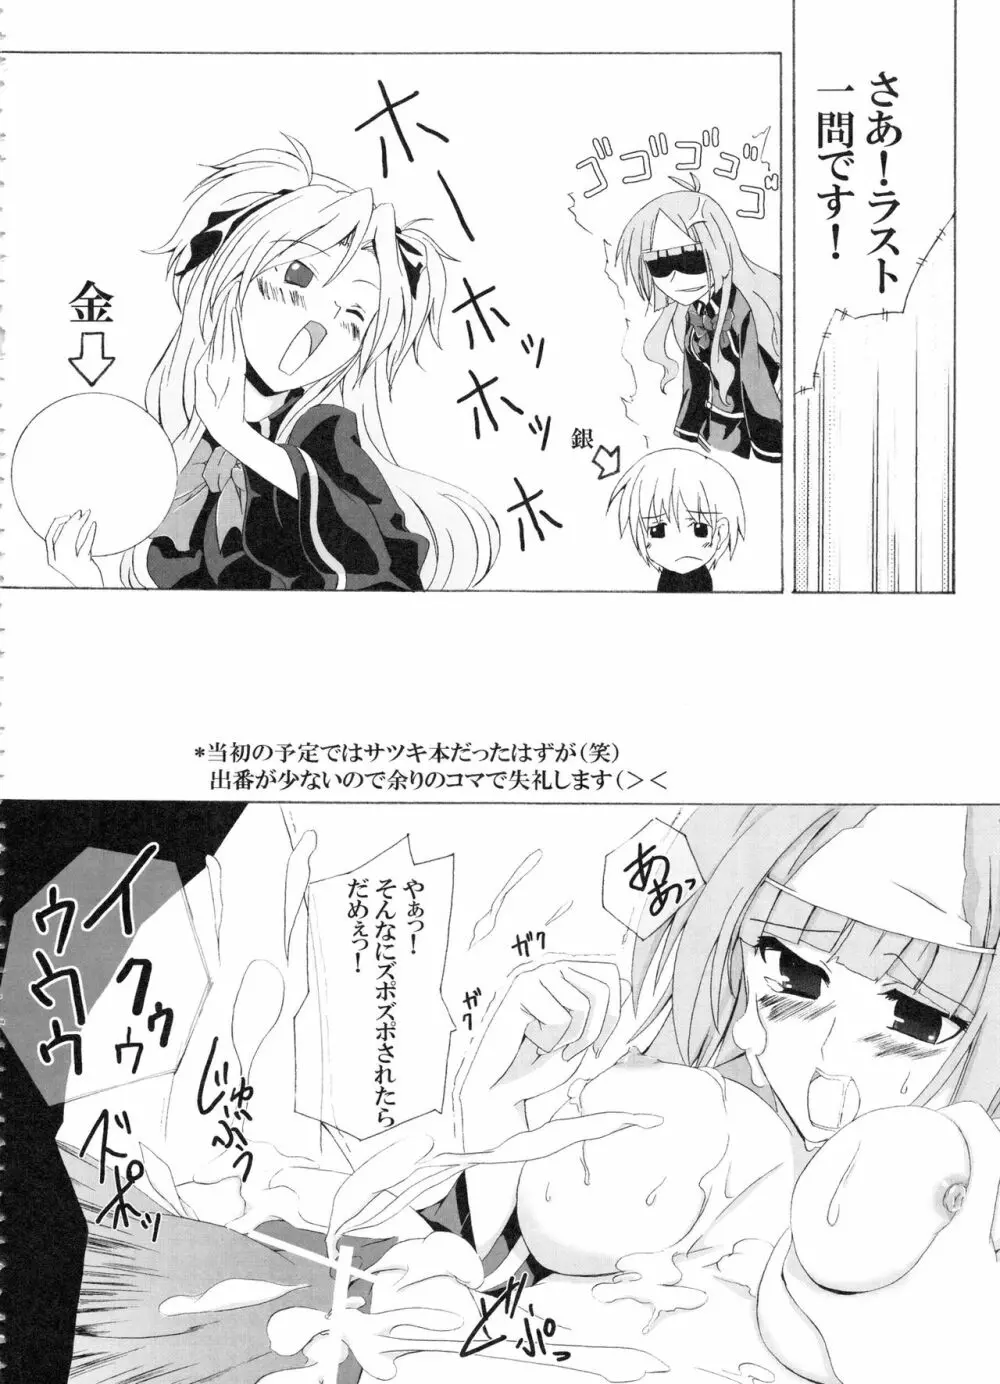 Z-FRONT総集編 - page17